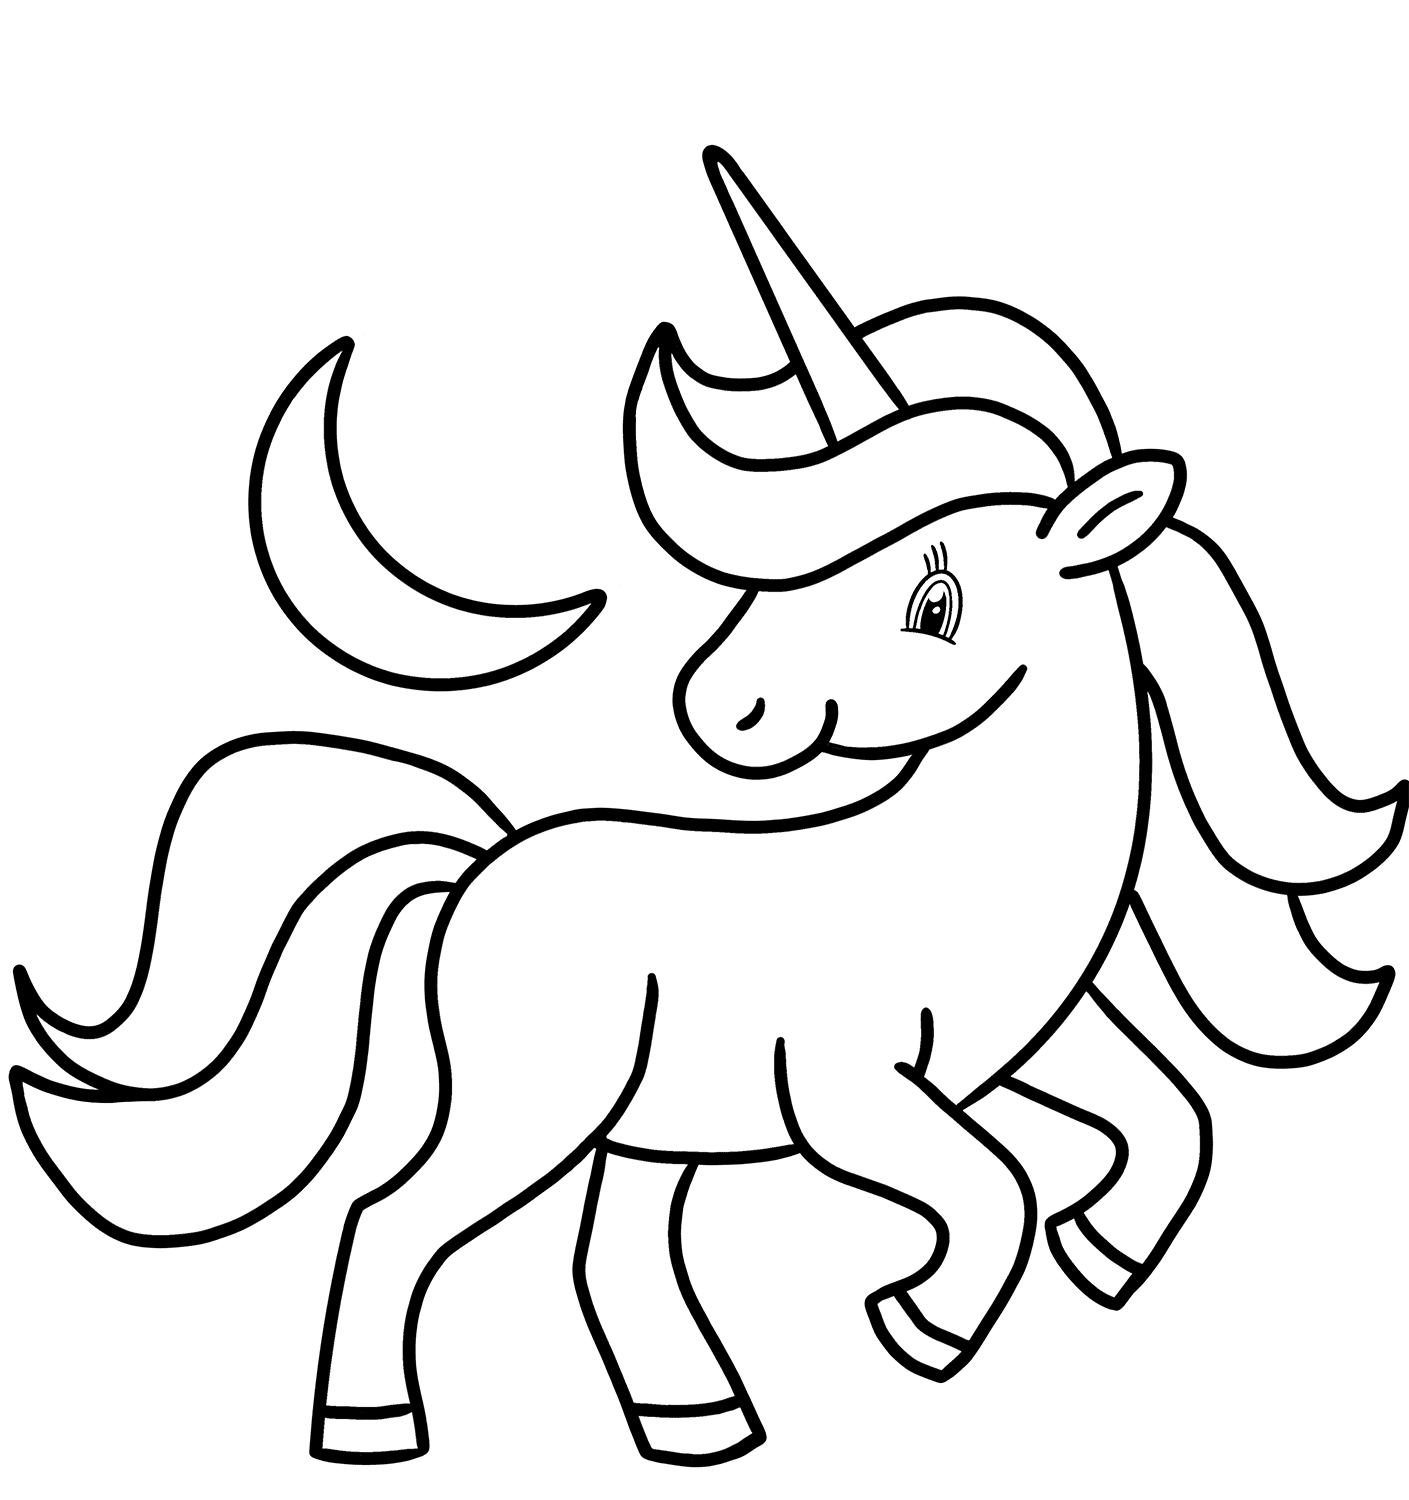 Unicorn And Crescent Moon Coloring Page